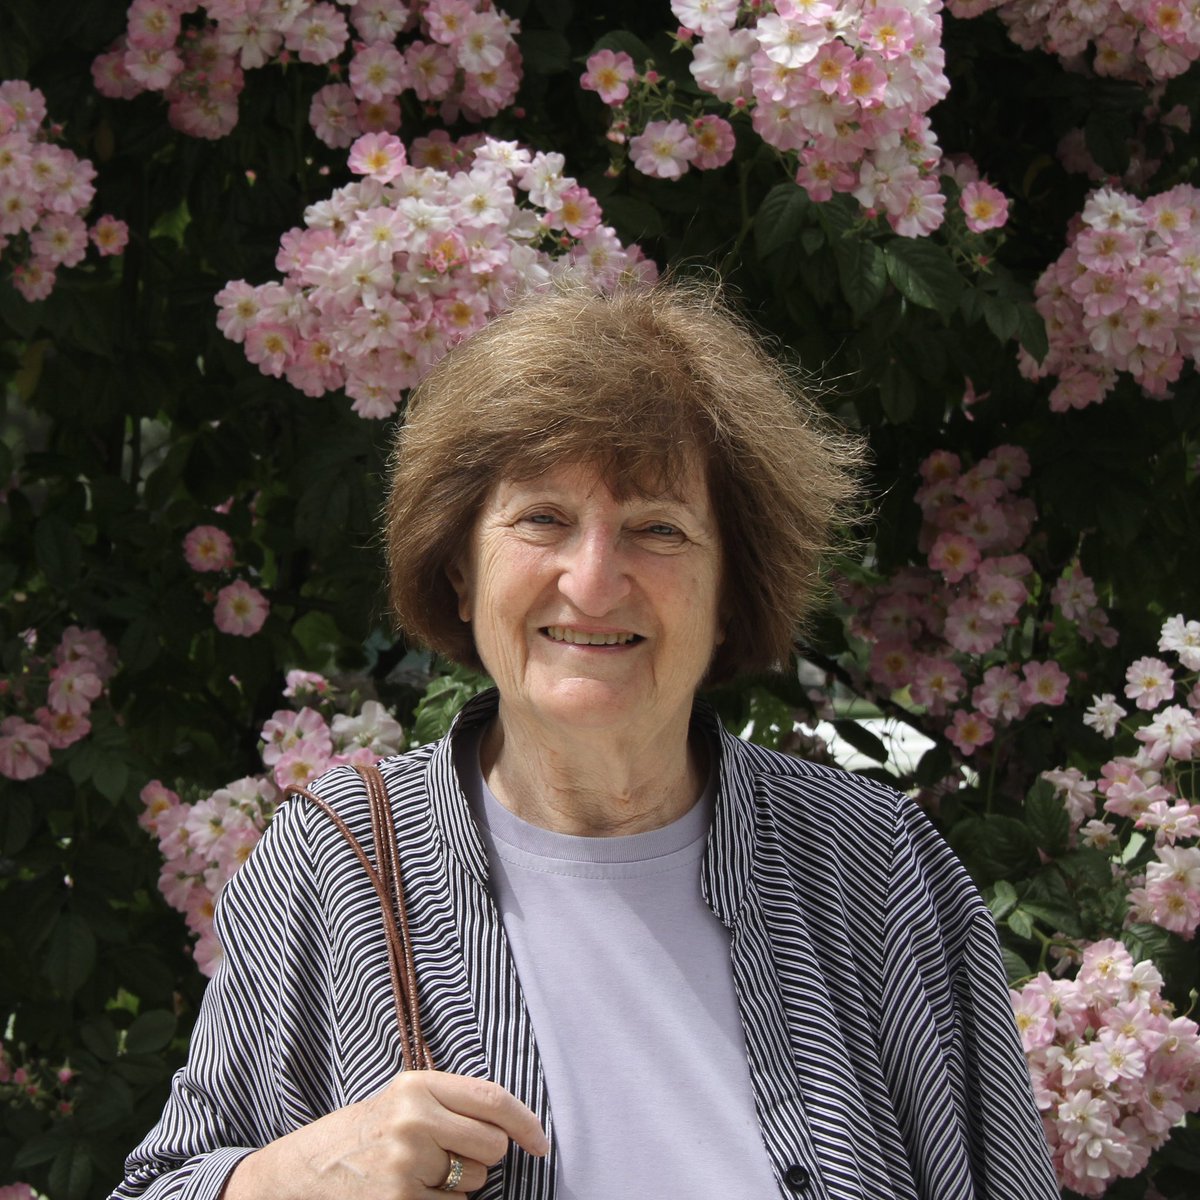 Generations of children have grown up with June Factor. Her marvellous books have charmed and cheered, taught kids to read and brought the playground to the page. We are so sorry to hear of her death and send our condolences to all of her family and friends. Vale, June.